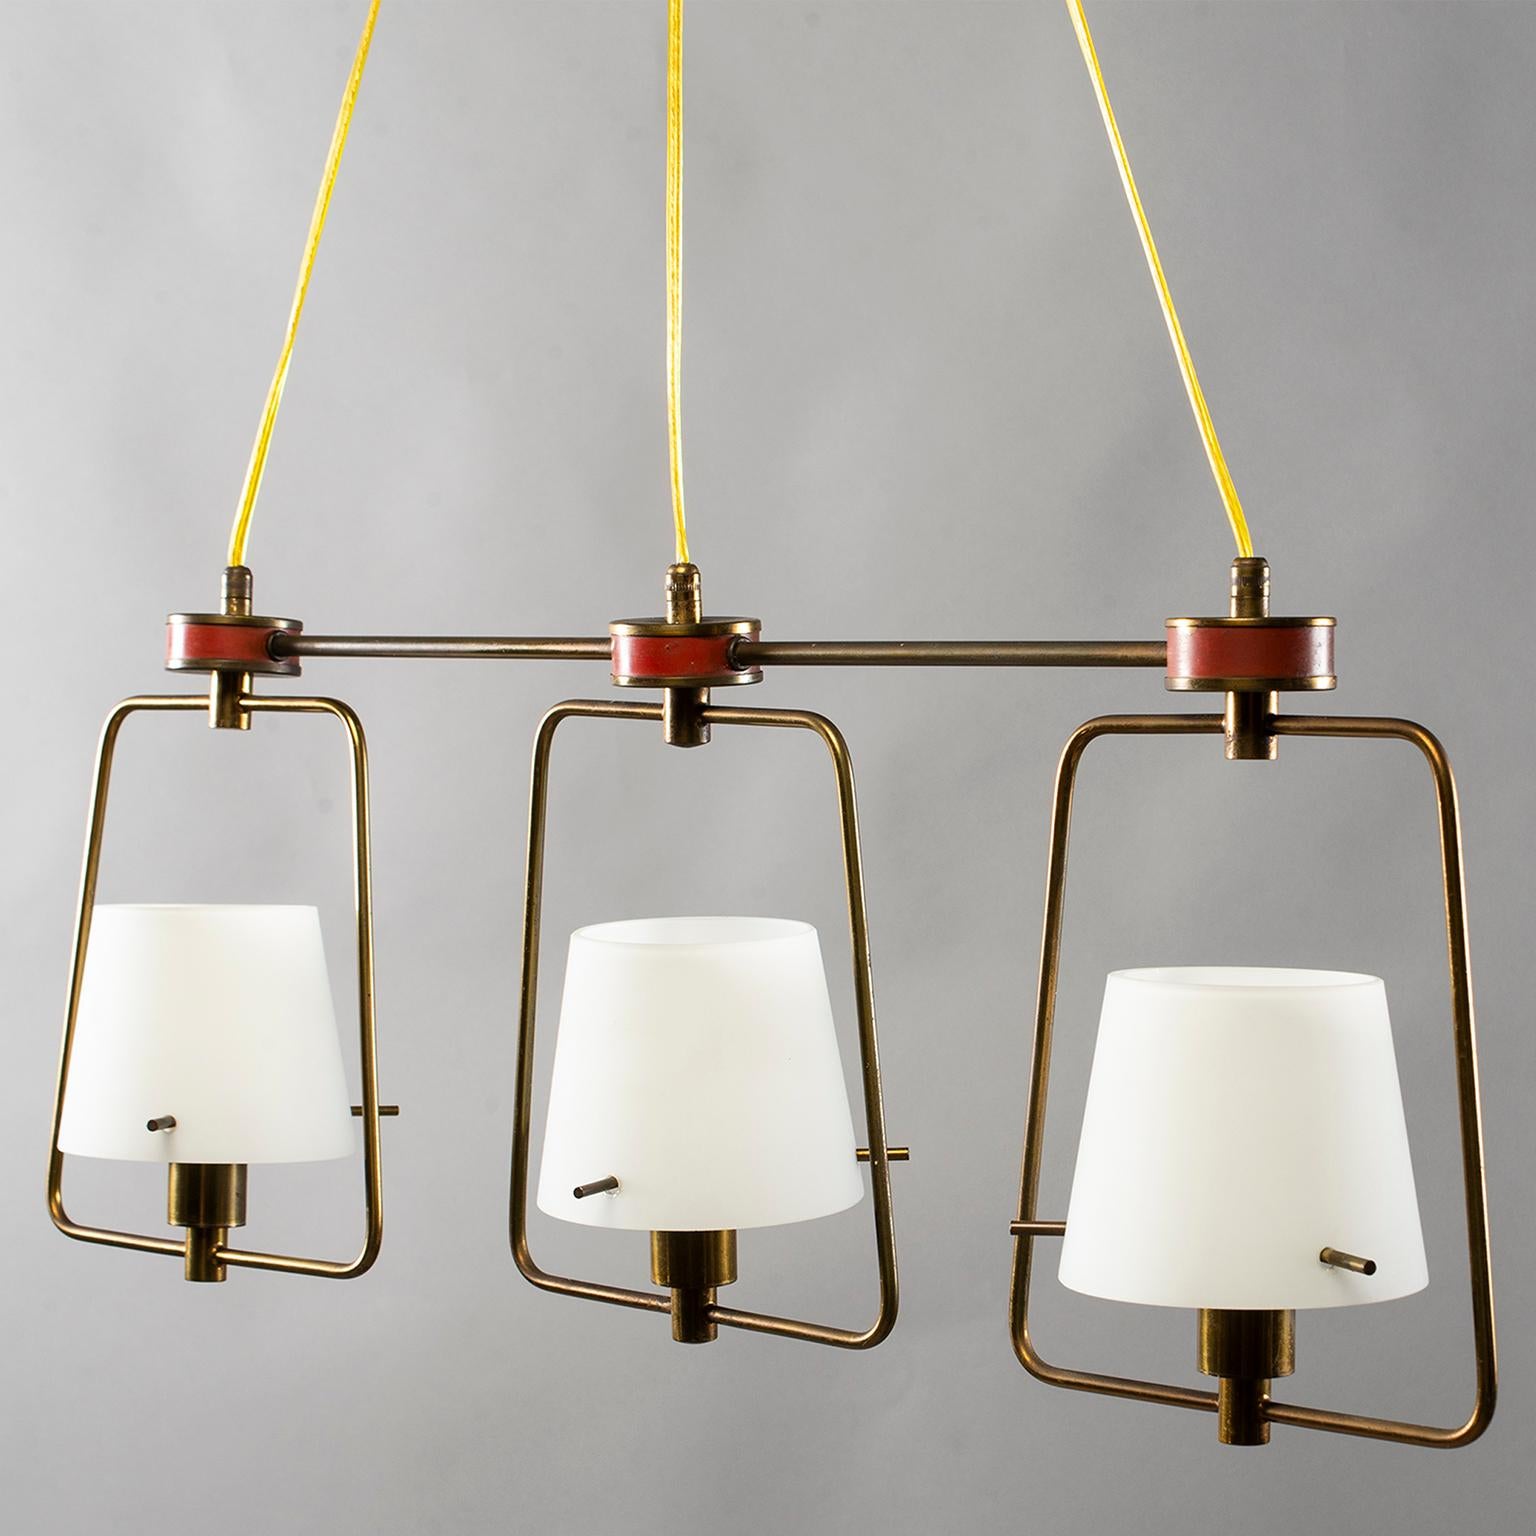 Stilnovo Three-Light Fixture with Glass Shades and Brass Fittings In Good Condition For Sale In Troy, MI